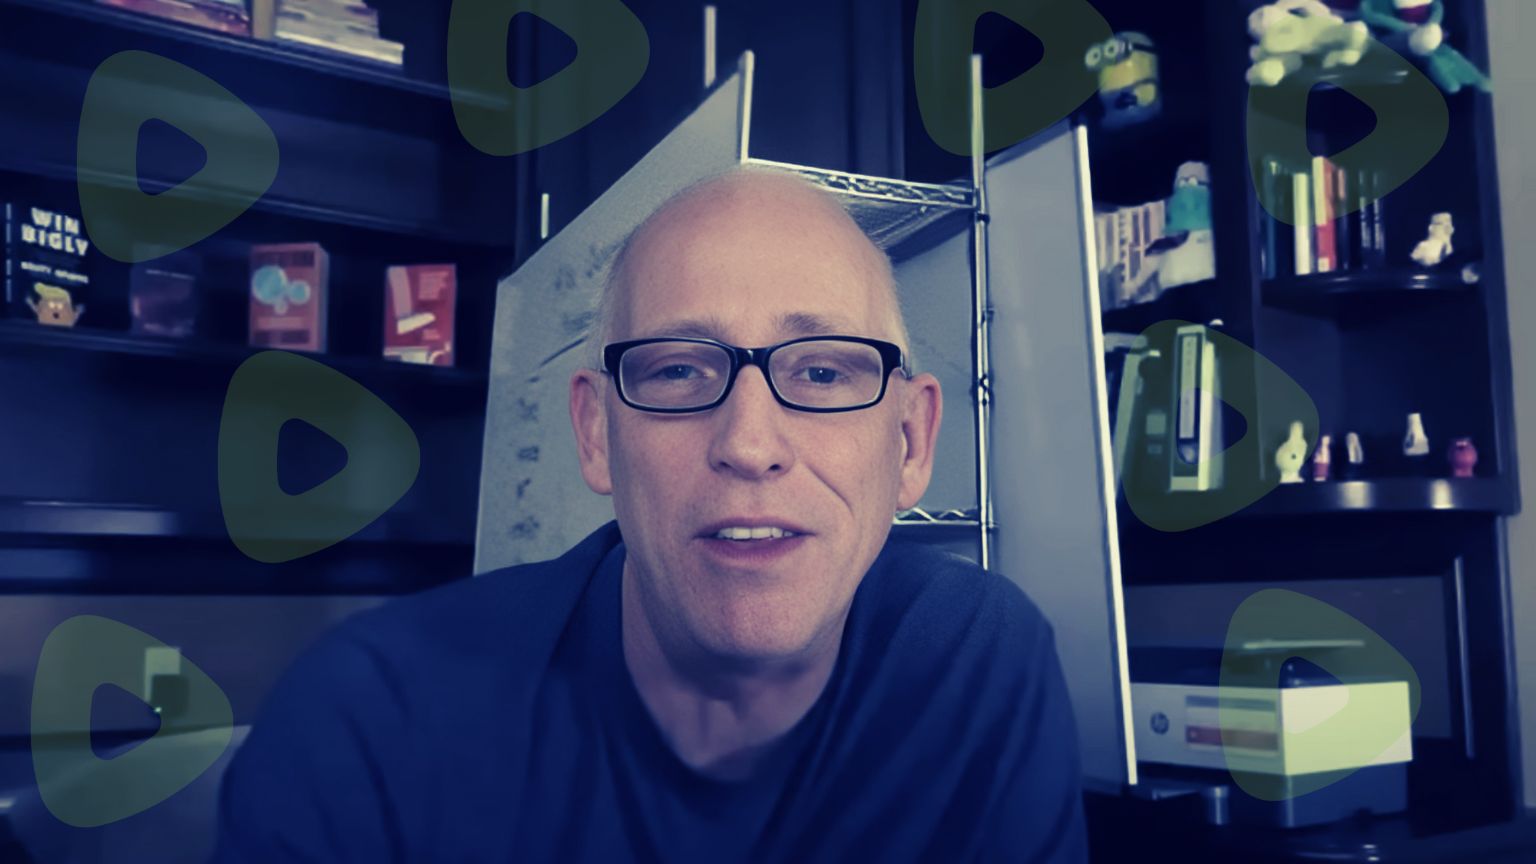 Scott Adams announces switch to Rumble for live streams after YouTube demonetization